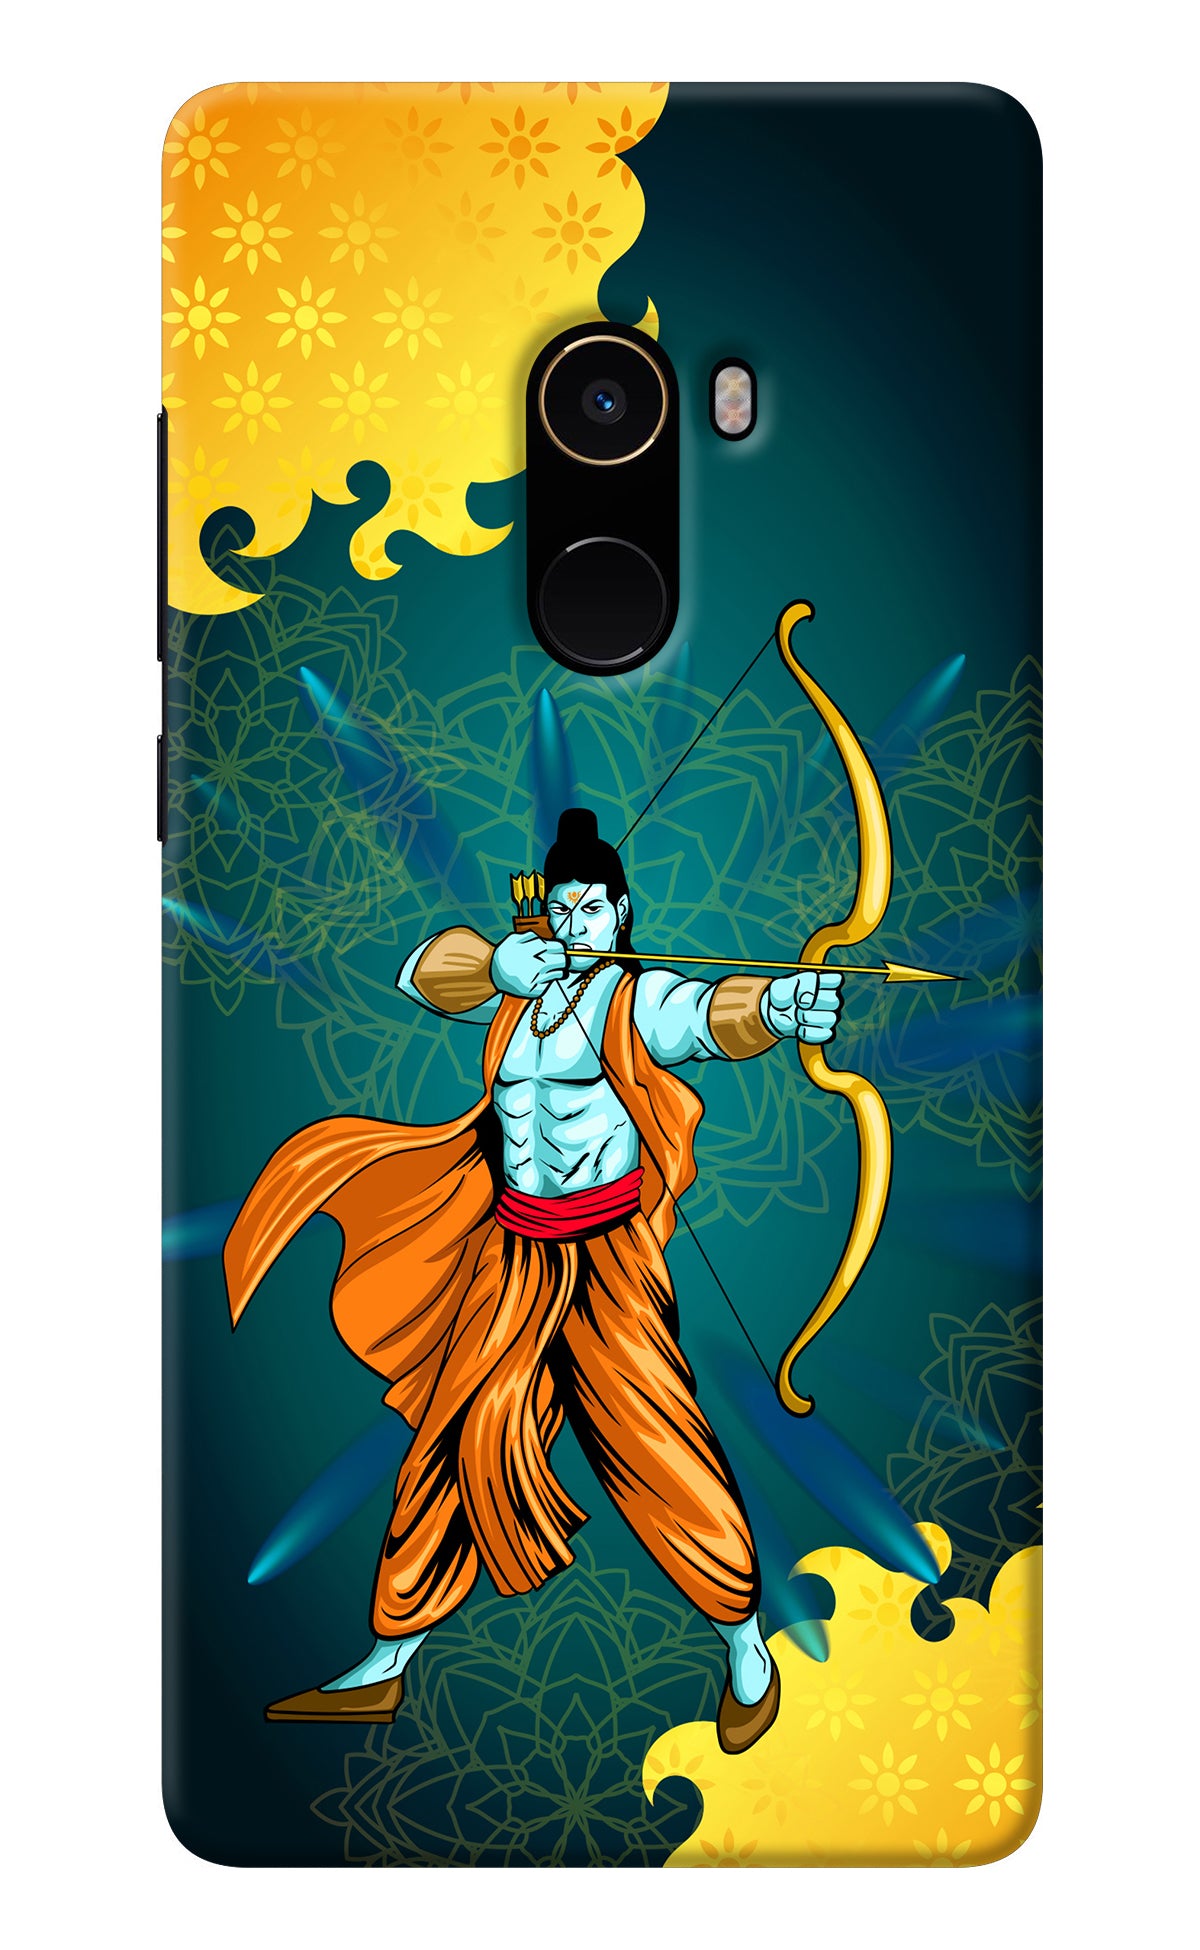 Lord Ram - 6 Mi Mix 2 Back Cover